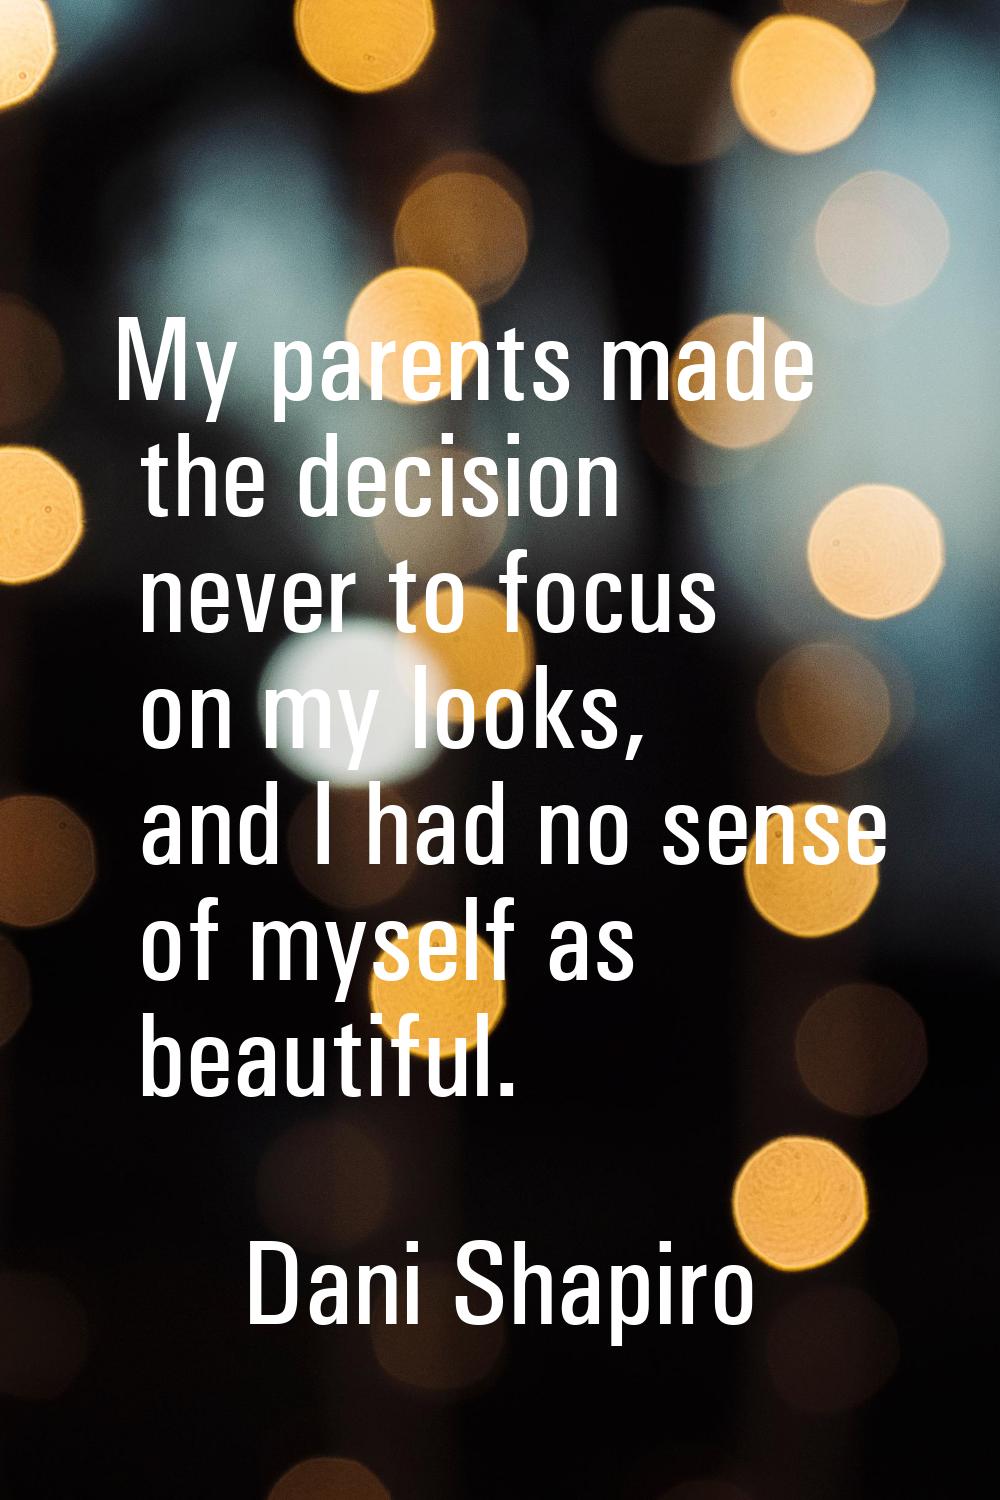 My parents made the decision never to focus on my looks, and I had no sense of myself as beautiful.